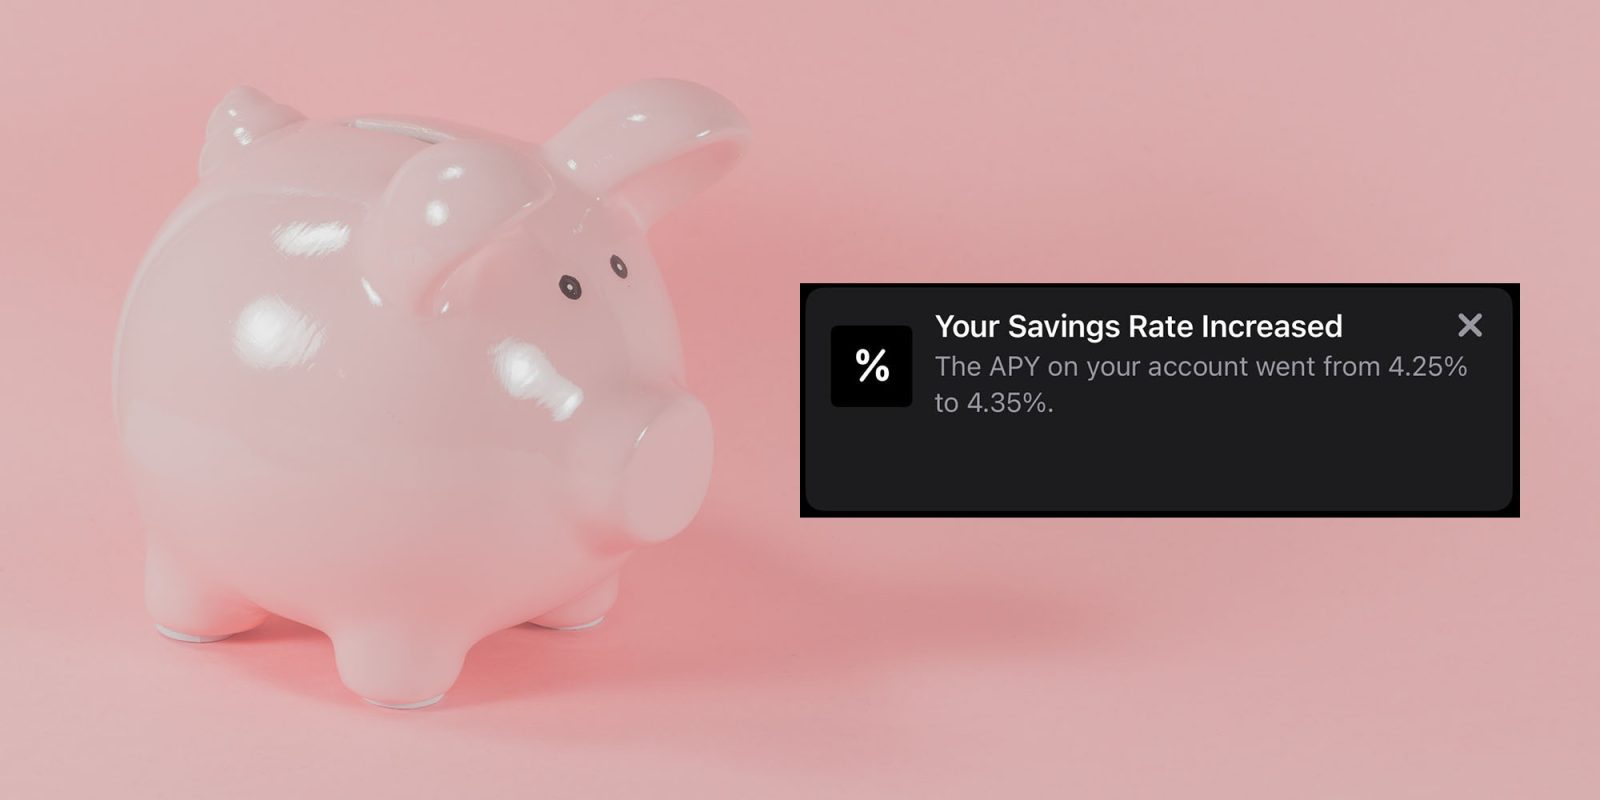 Apple Card Savings interest rate | Piggy bank, with Apple's push notification